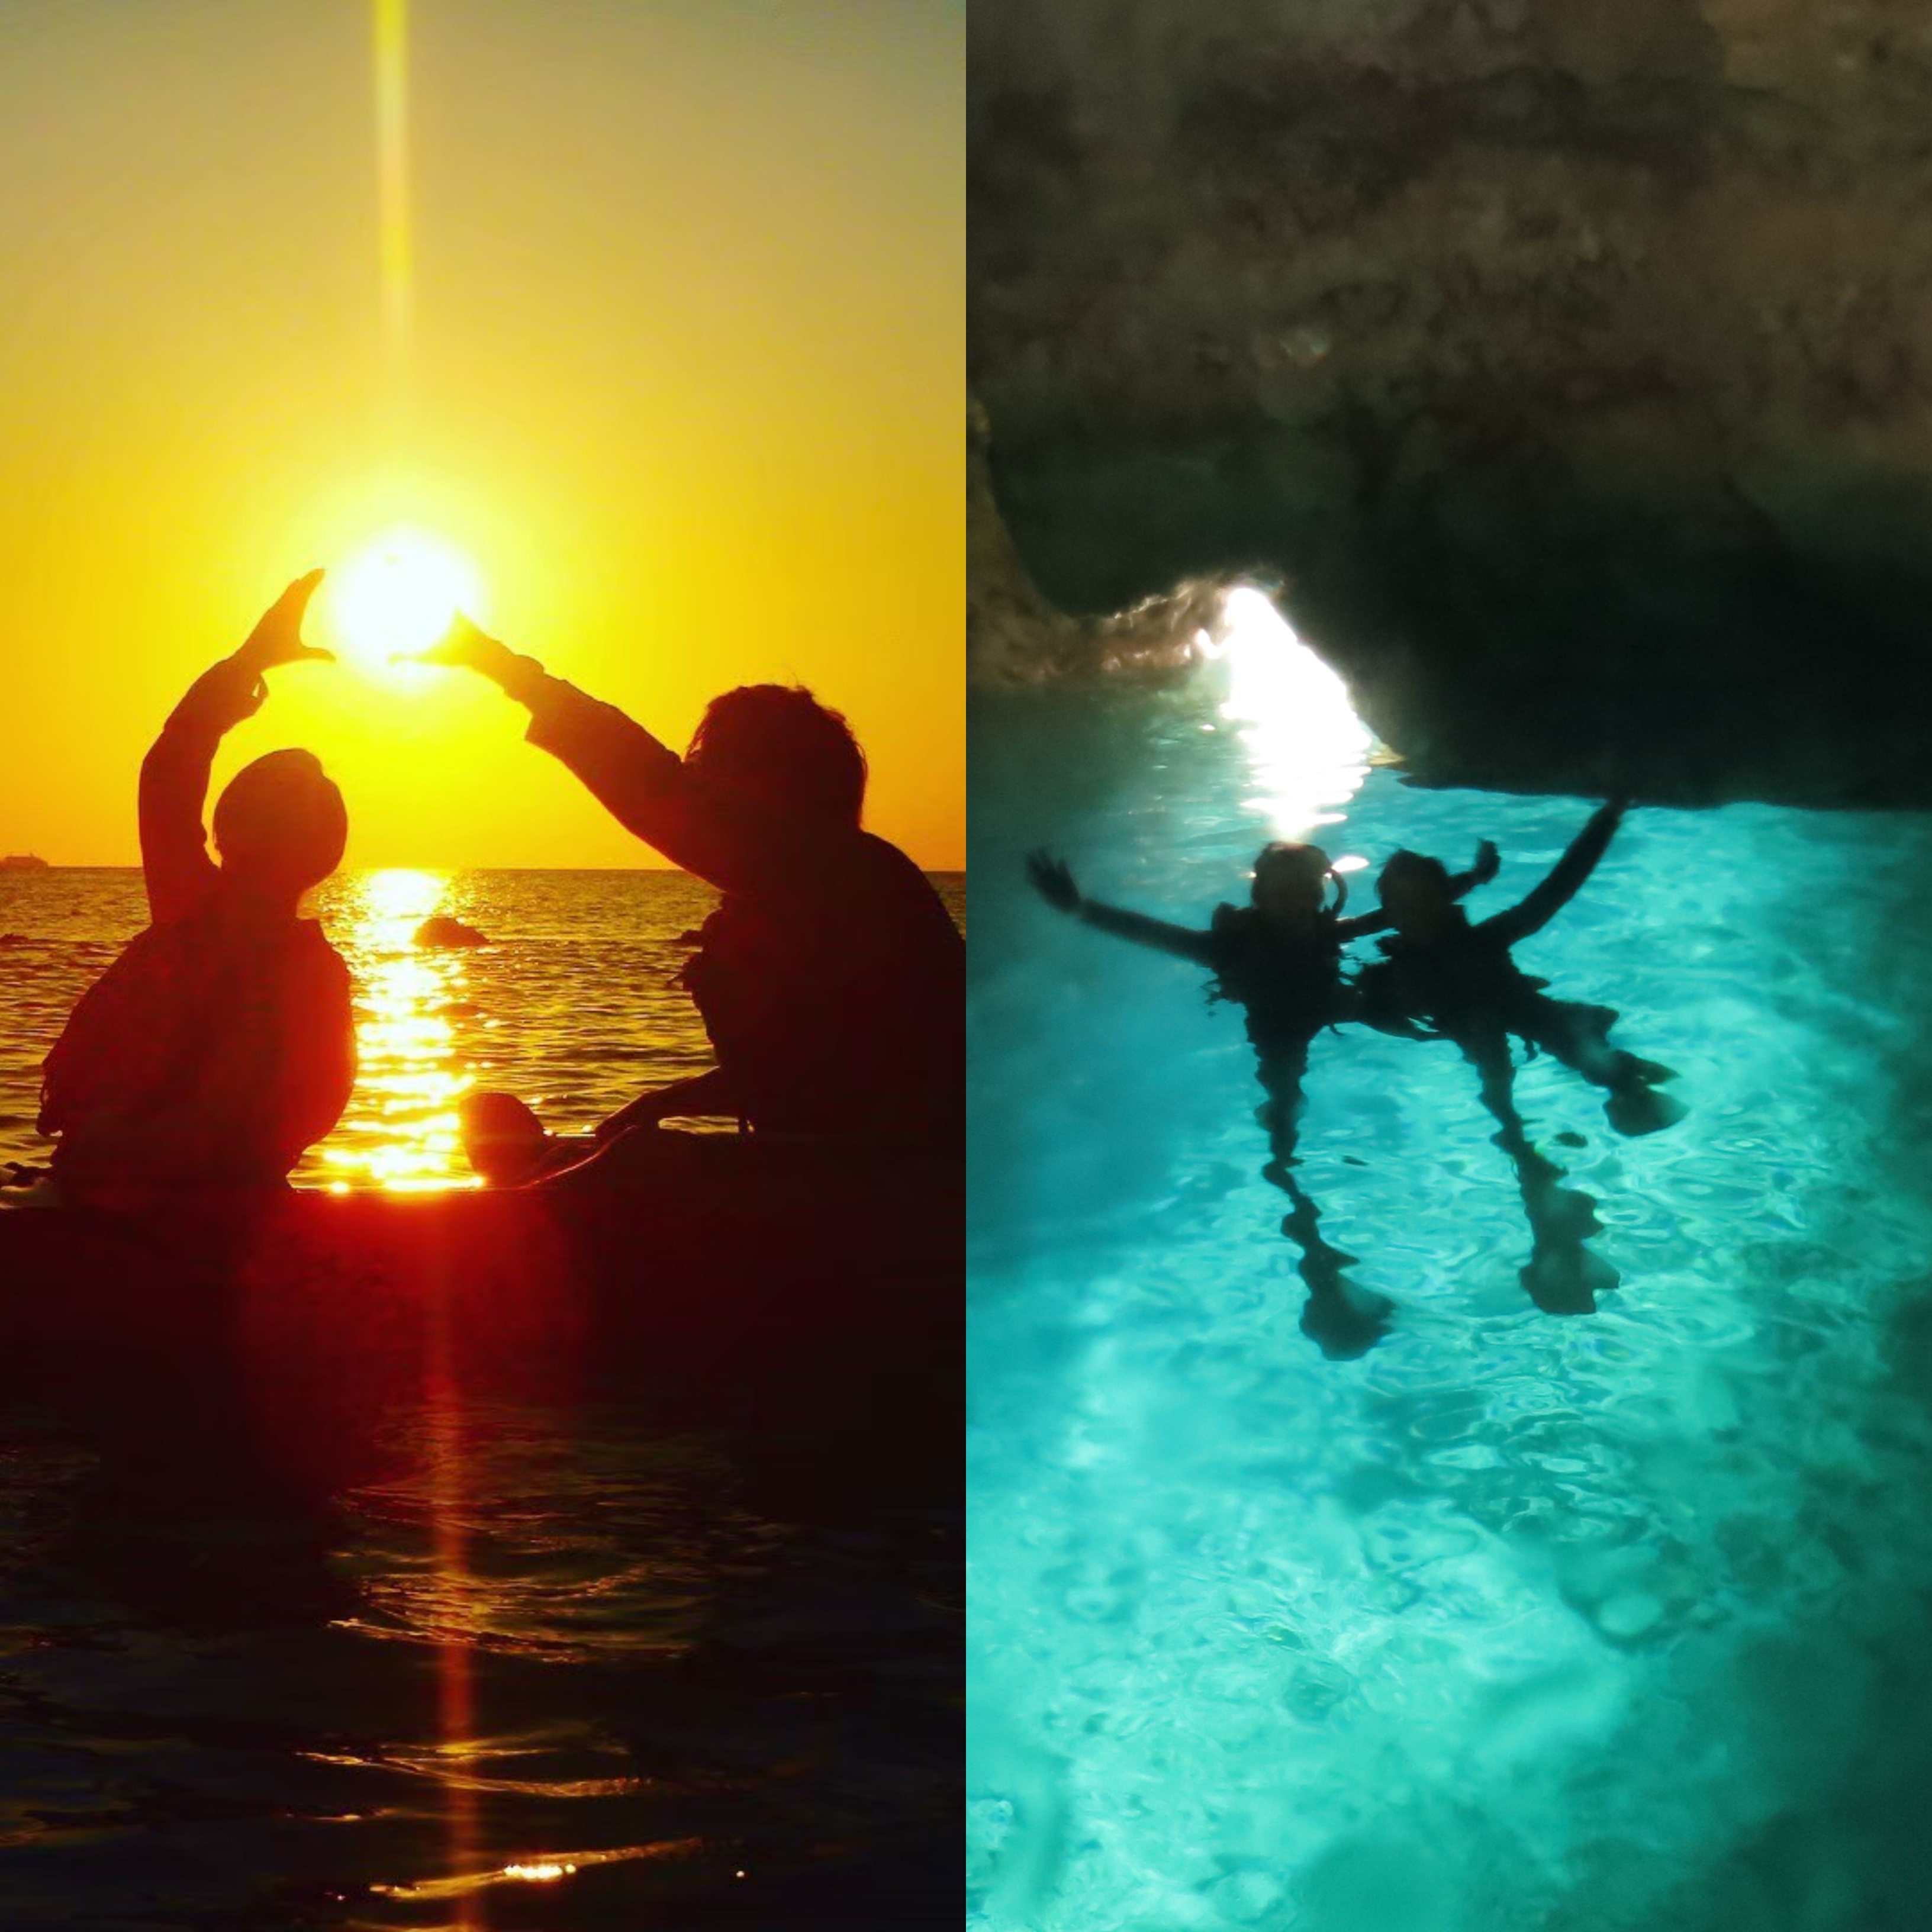 Popular plan for Okinawa/Onna Village/Kadena Blue Cave Snorkel & Sunset Kayak Tour♪《6 years old and above can participate, first timers welcome♪》